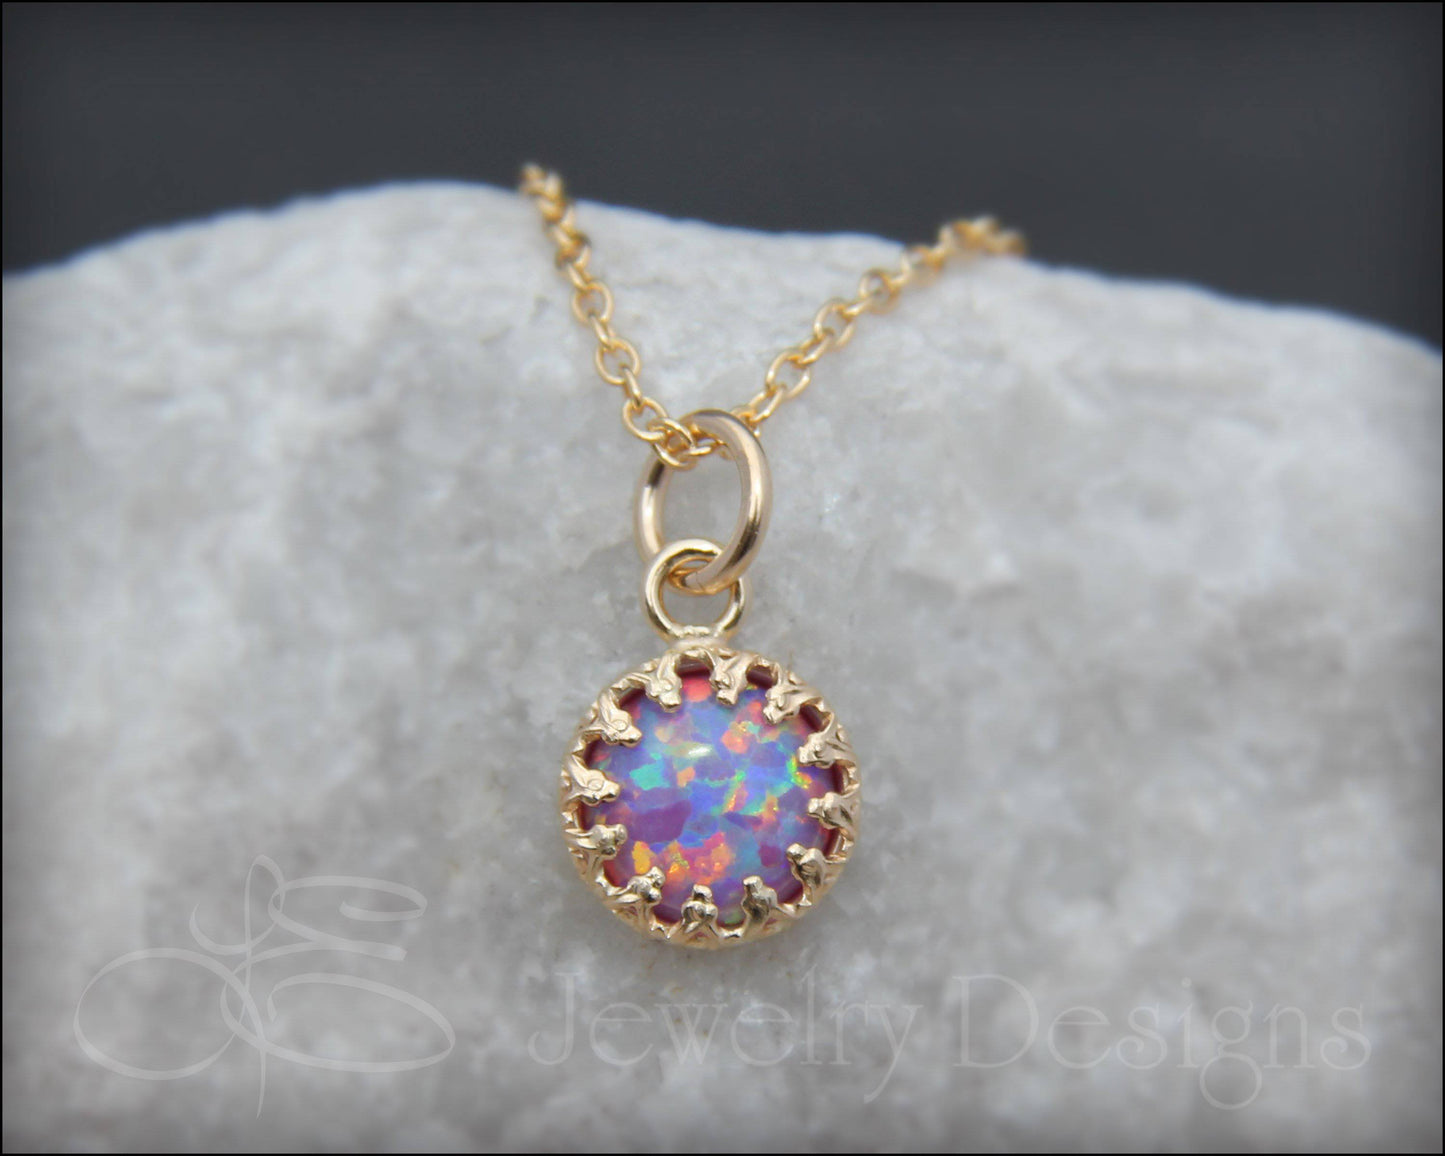 Load image into Gallery viewer, Gold Opal Necklace (choose color) - LE Jewelry Designs
